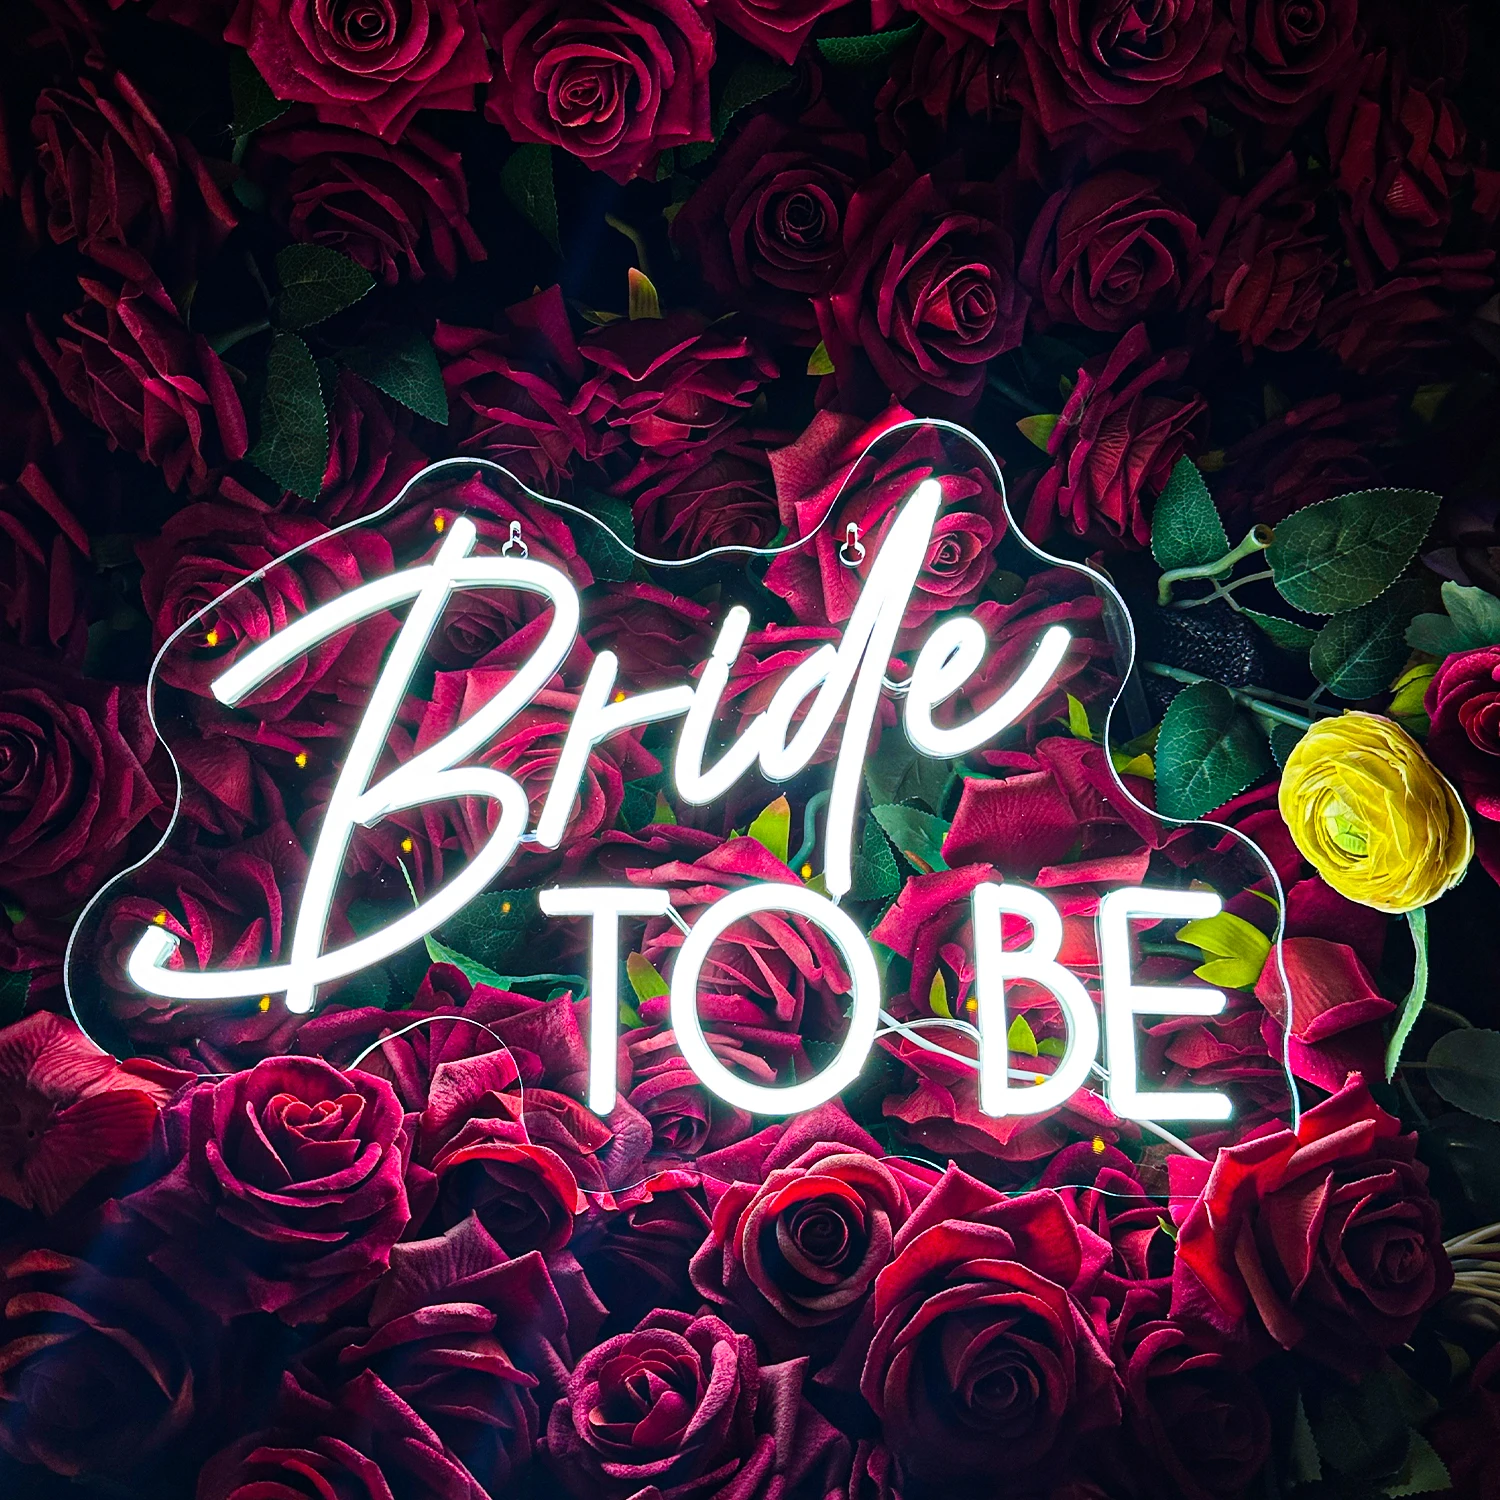 Bride To Be Neon Sign Led Lights Bedroom Wall Wedding Scene Layout Valentine's Day Party BAR Home Restaurant ART Decoration Lamp